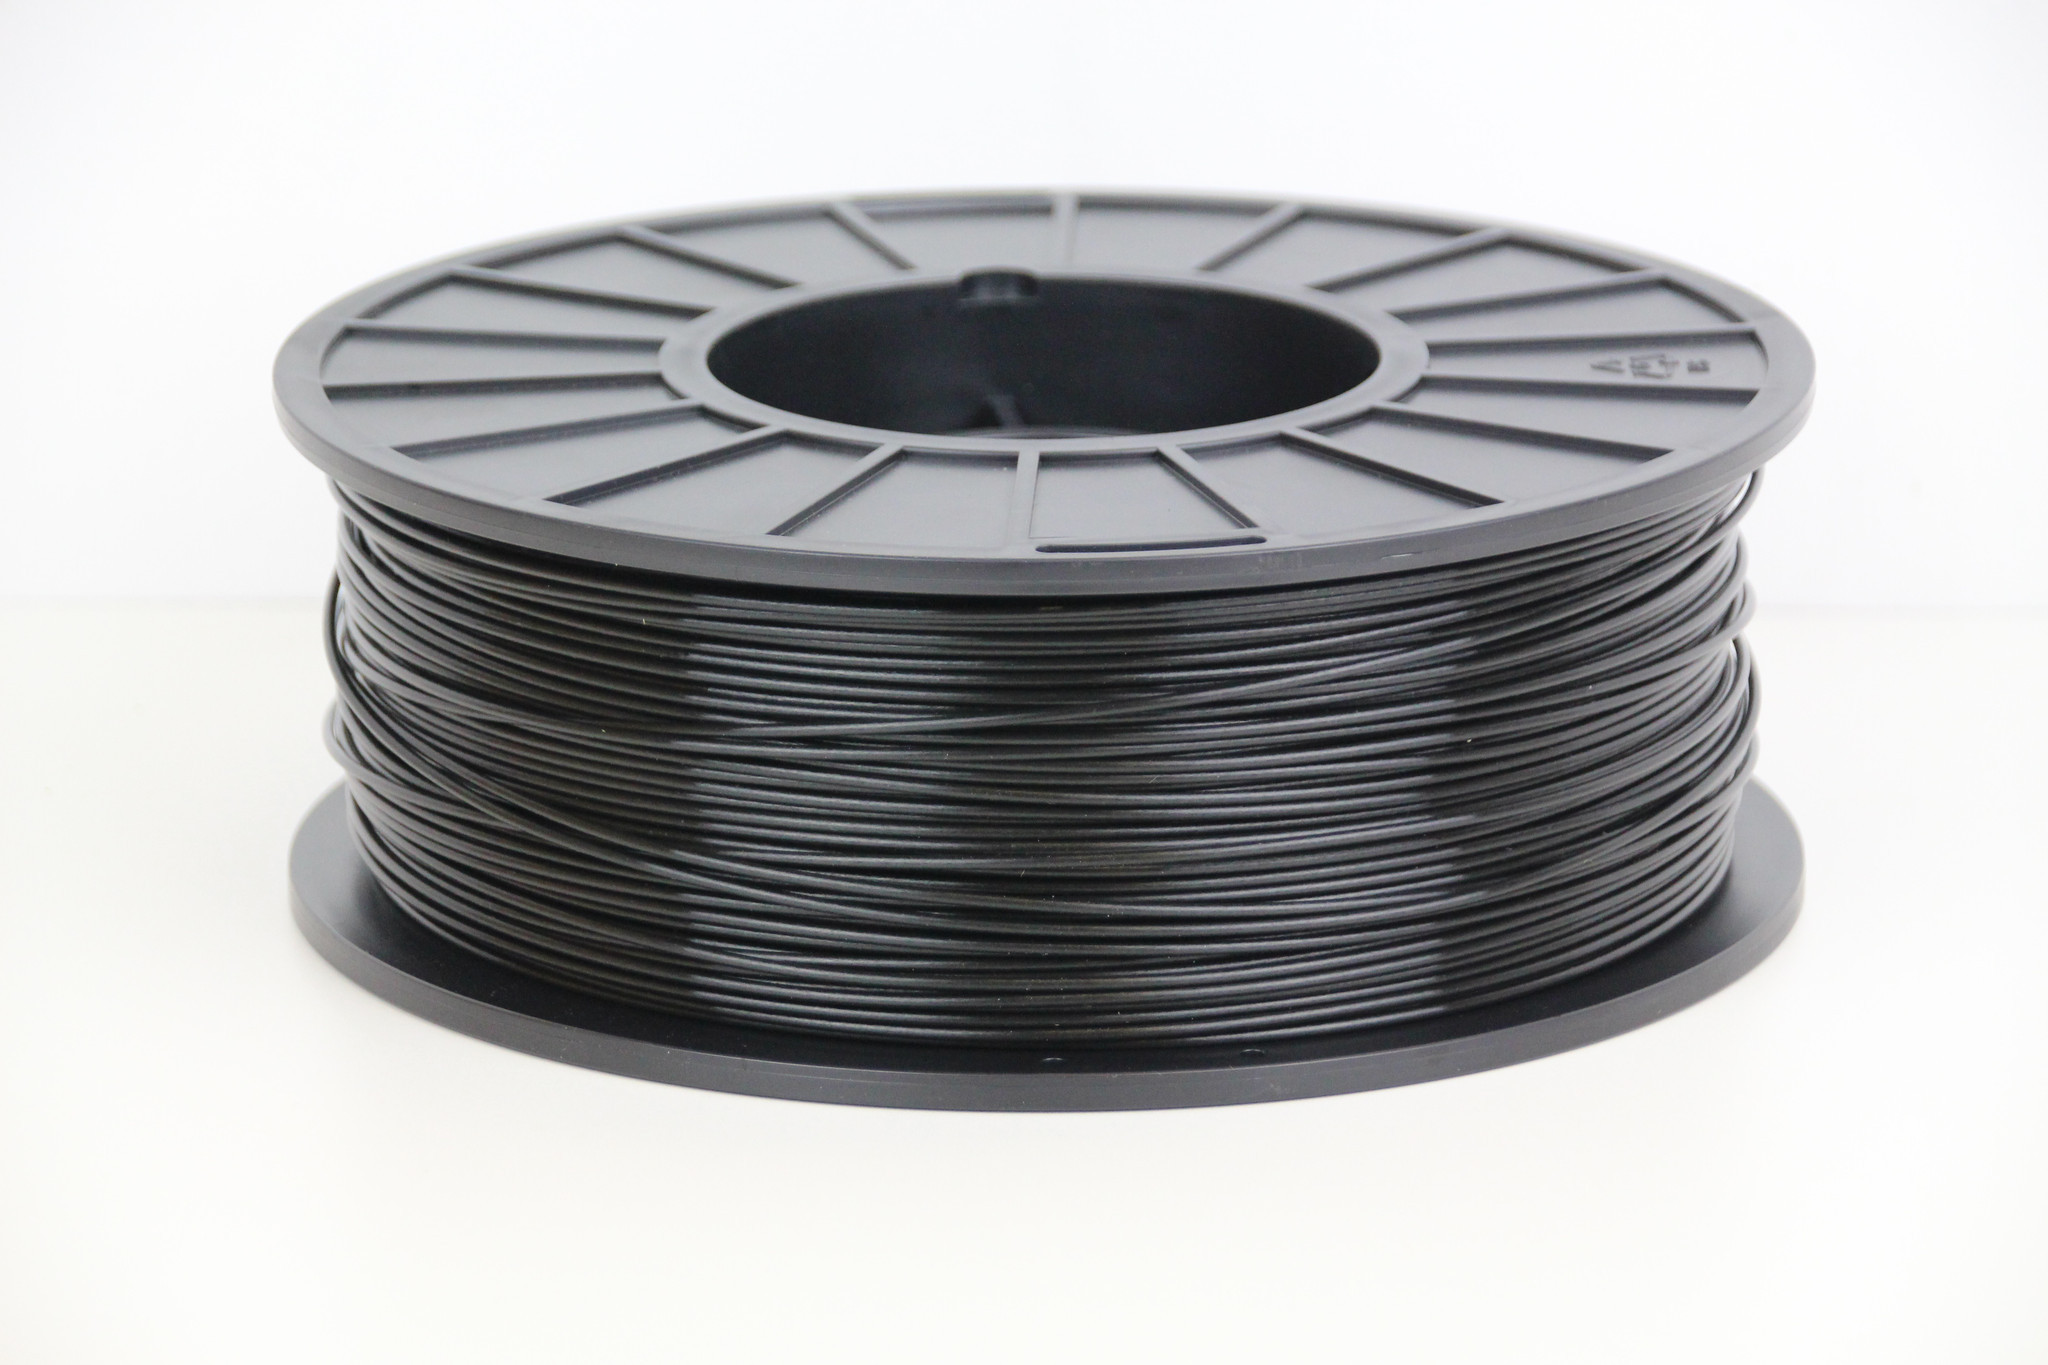 Premium Quality Black ABS 3D Filament compatible with Universal PFABSBK